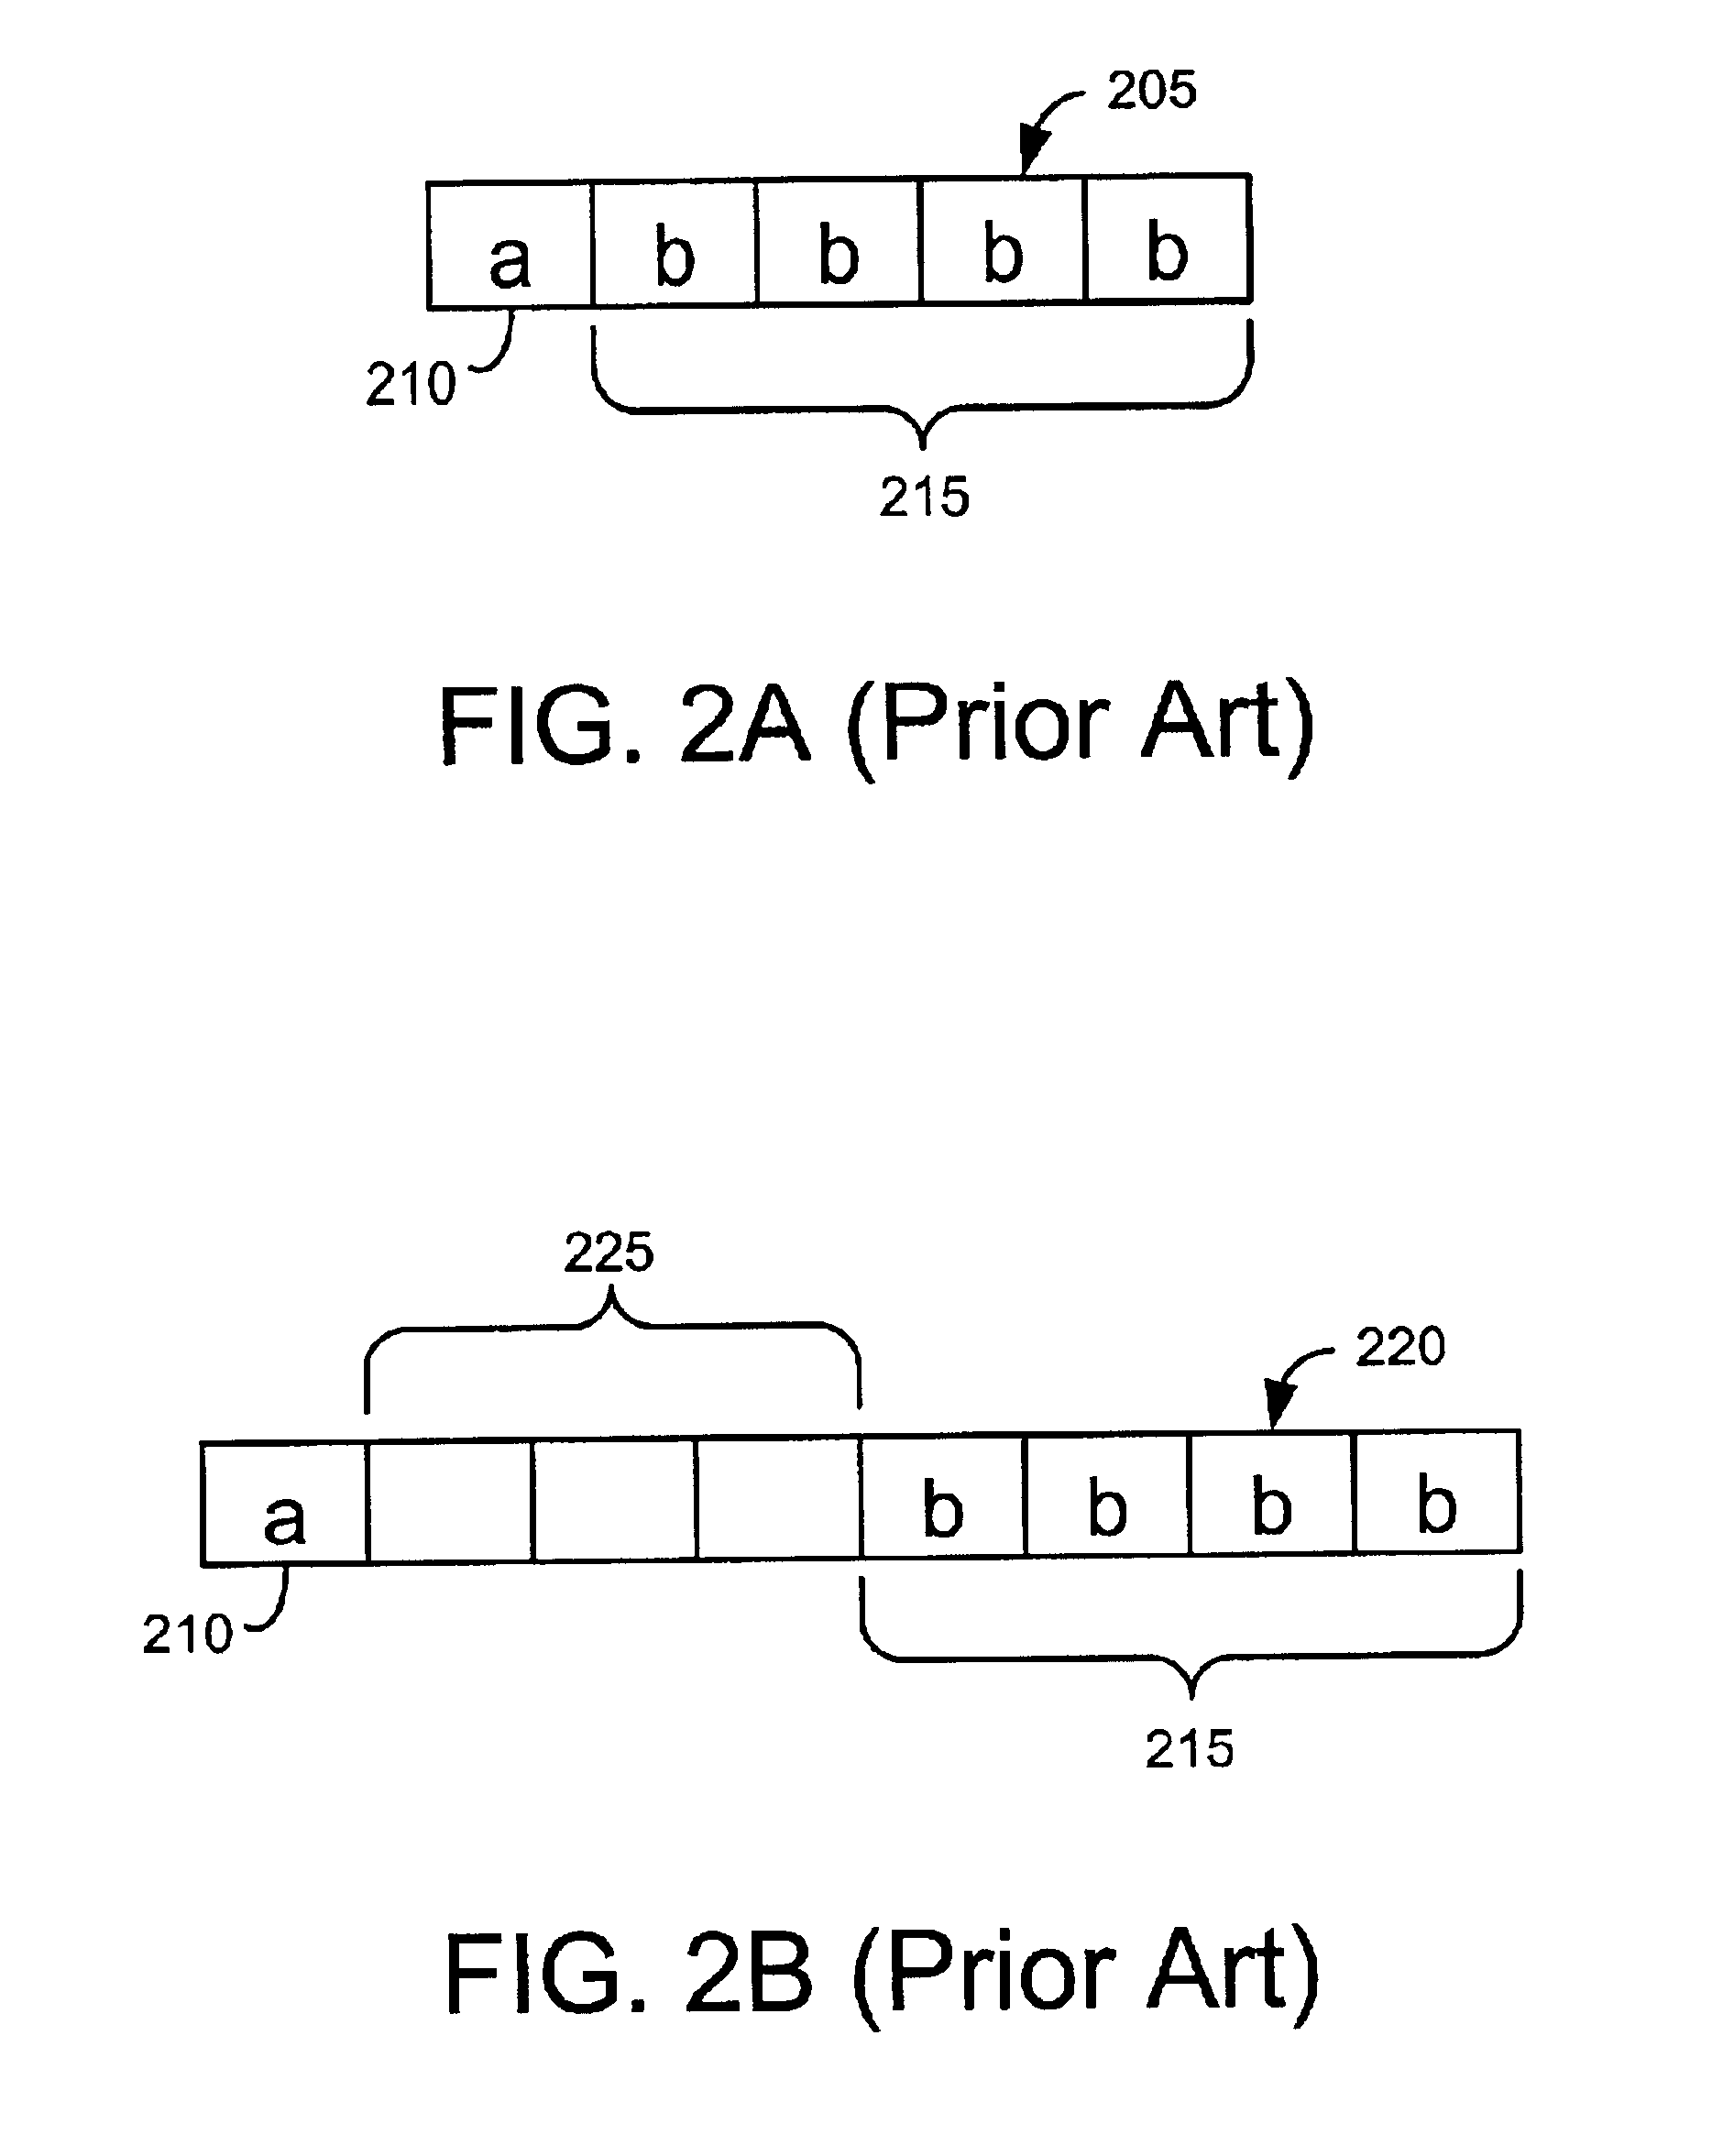 Method for transferring a packed data structure to an unpacked data structure by copying the packed data using pointer